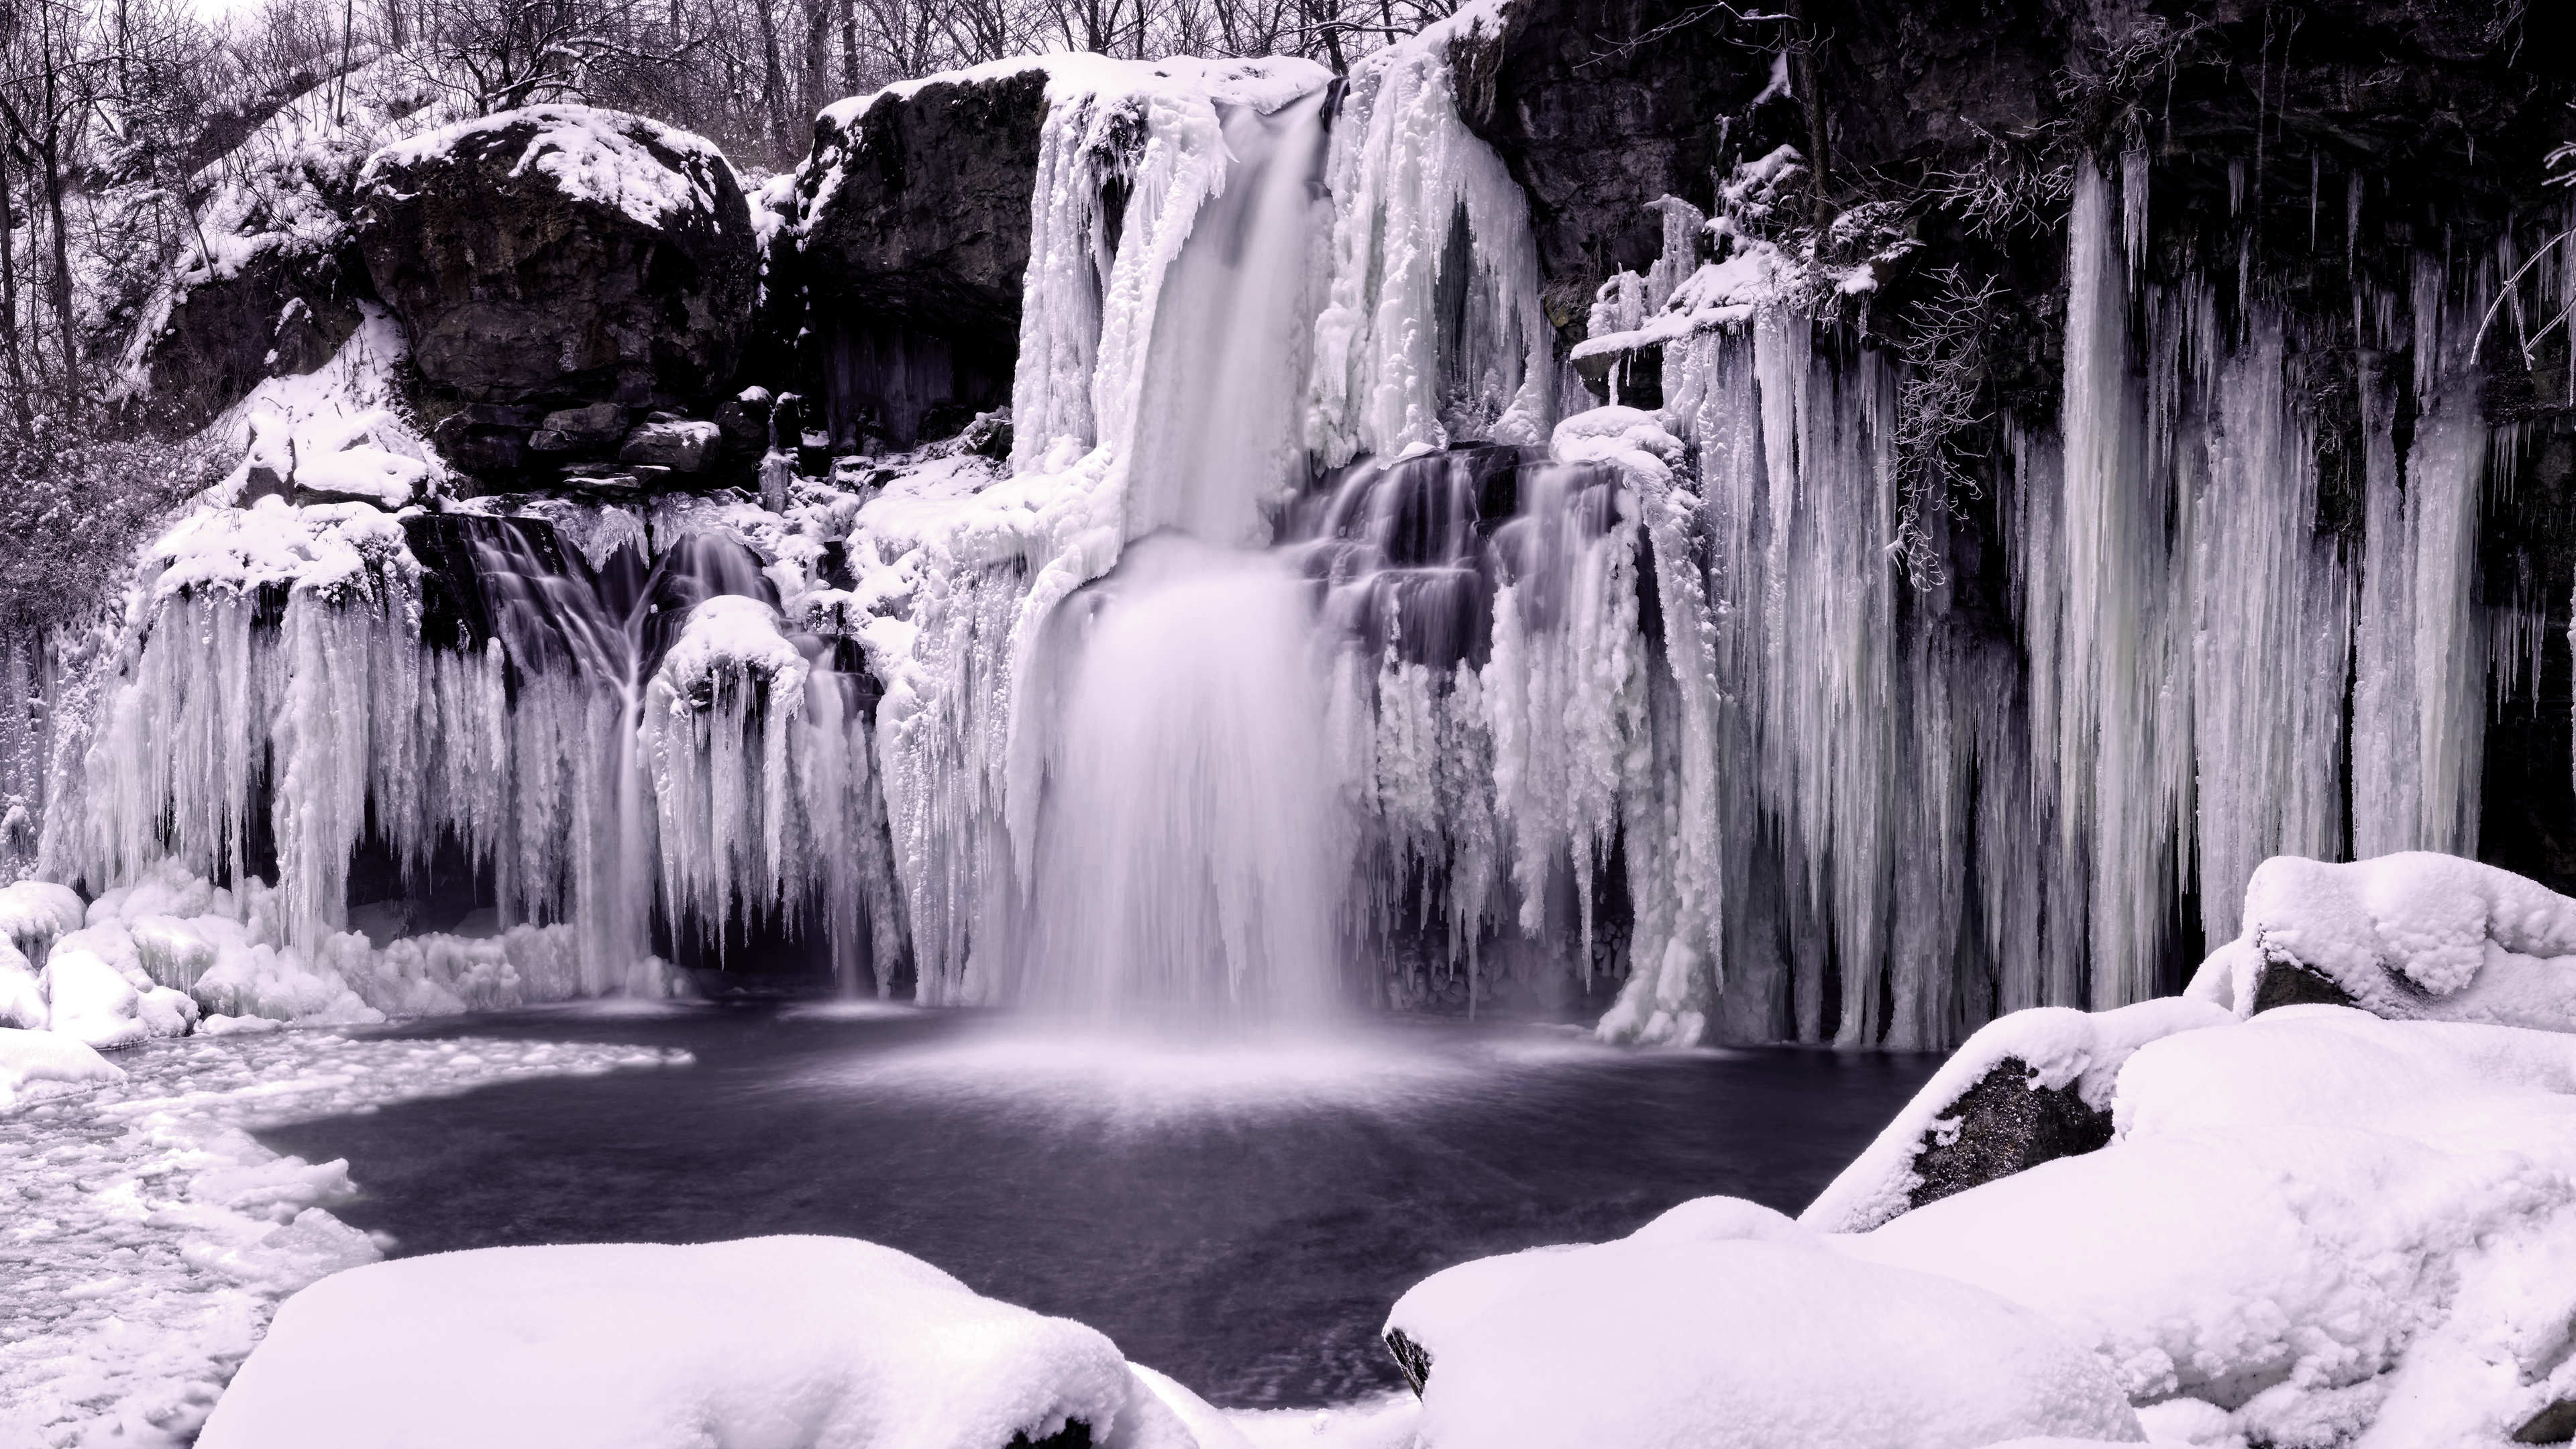 Icicle Frozen River Waterfall Snow Edward Bartel Edit Long Exposure Winter Nature 3840x2160